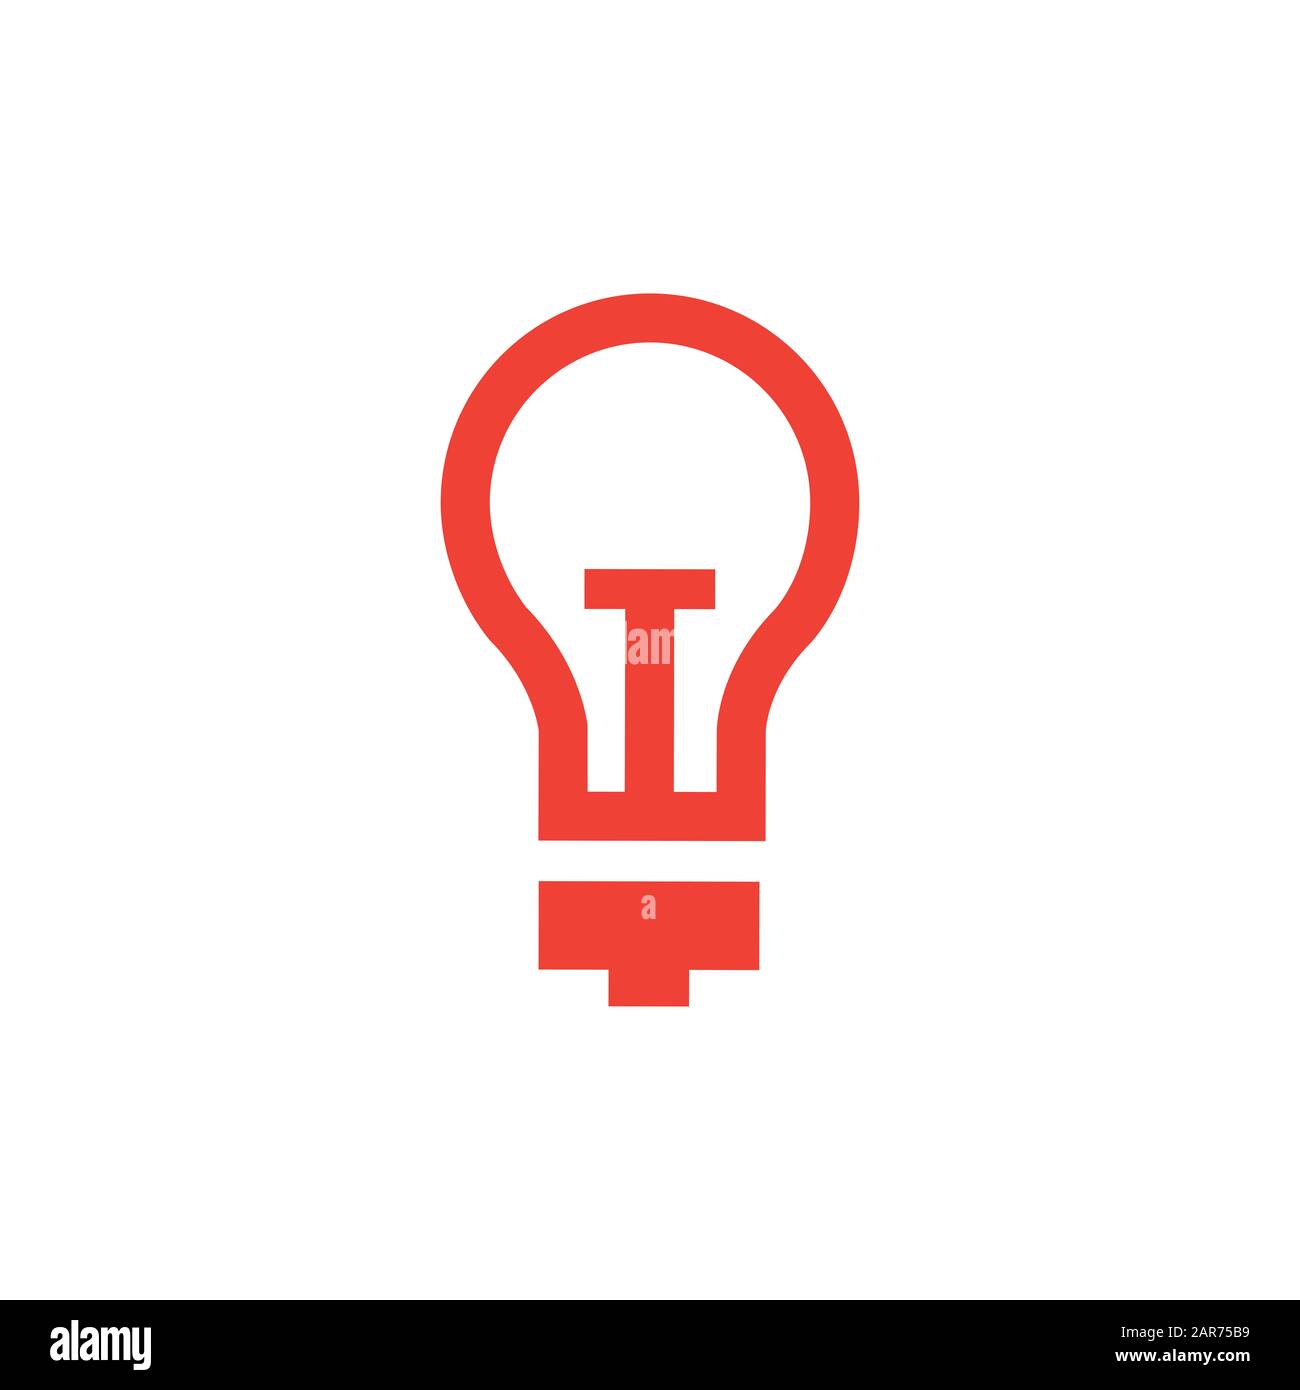 Light Bulb Red Icon On White Background. Red Flat Style Vector Illustration. Stock Photo